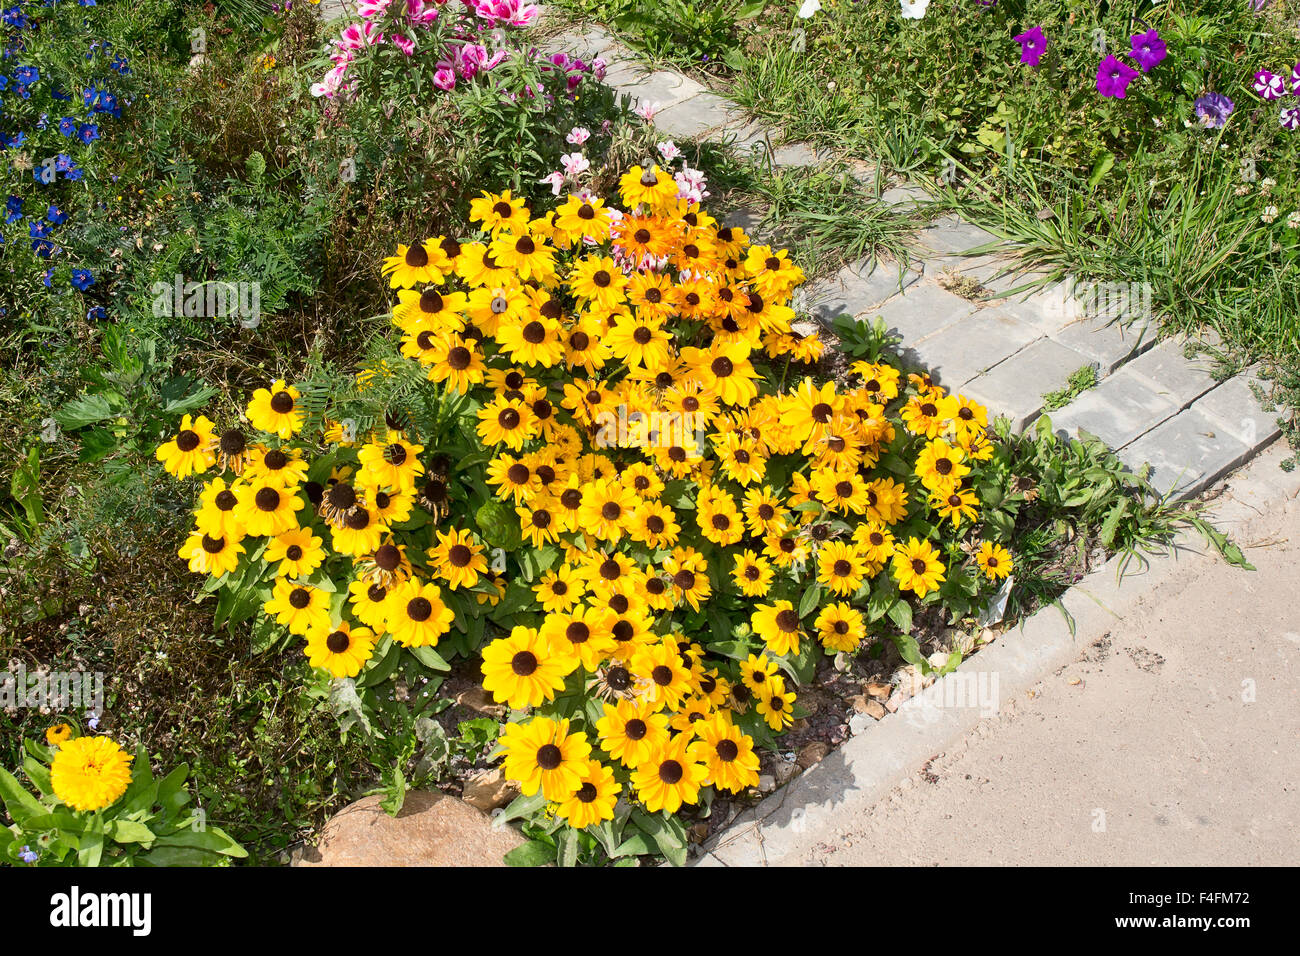 Flower bed with wild flowers and ornamental Stock Photo